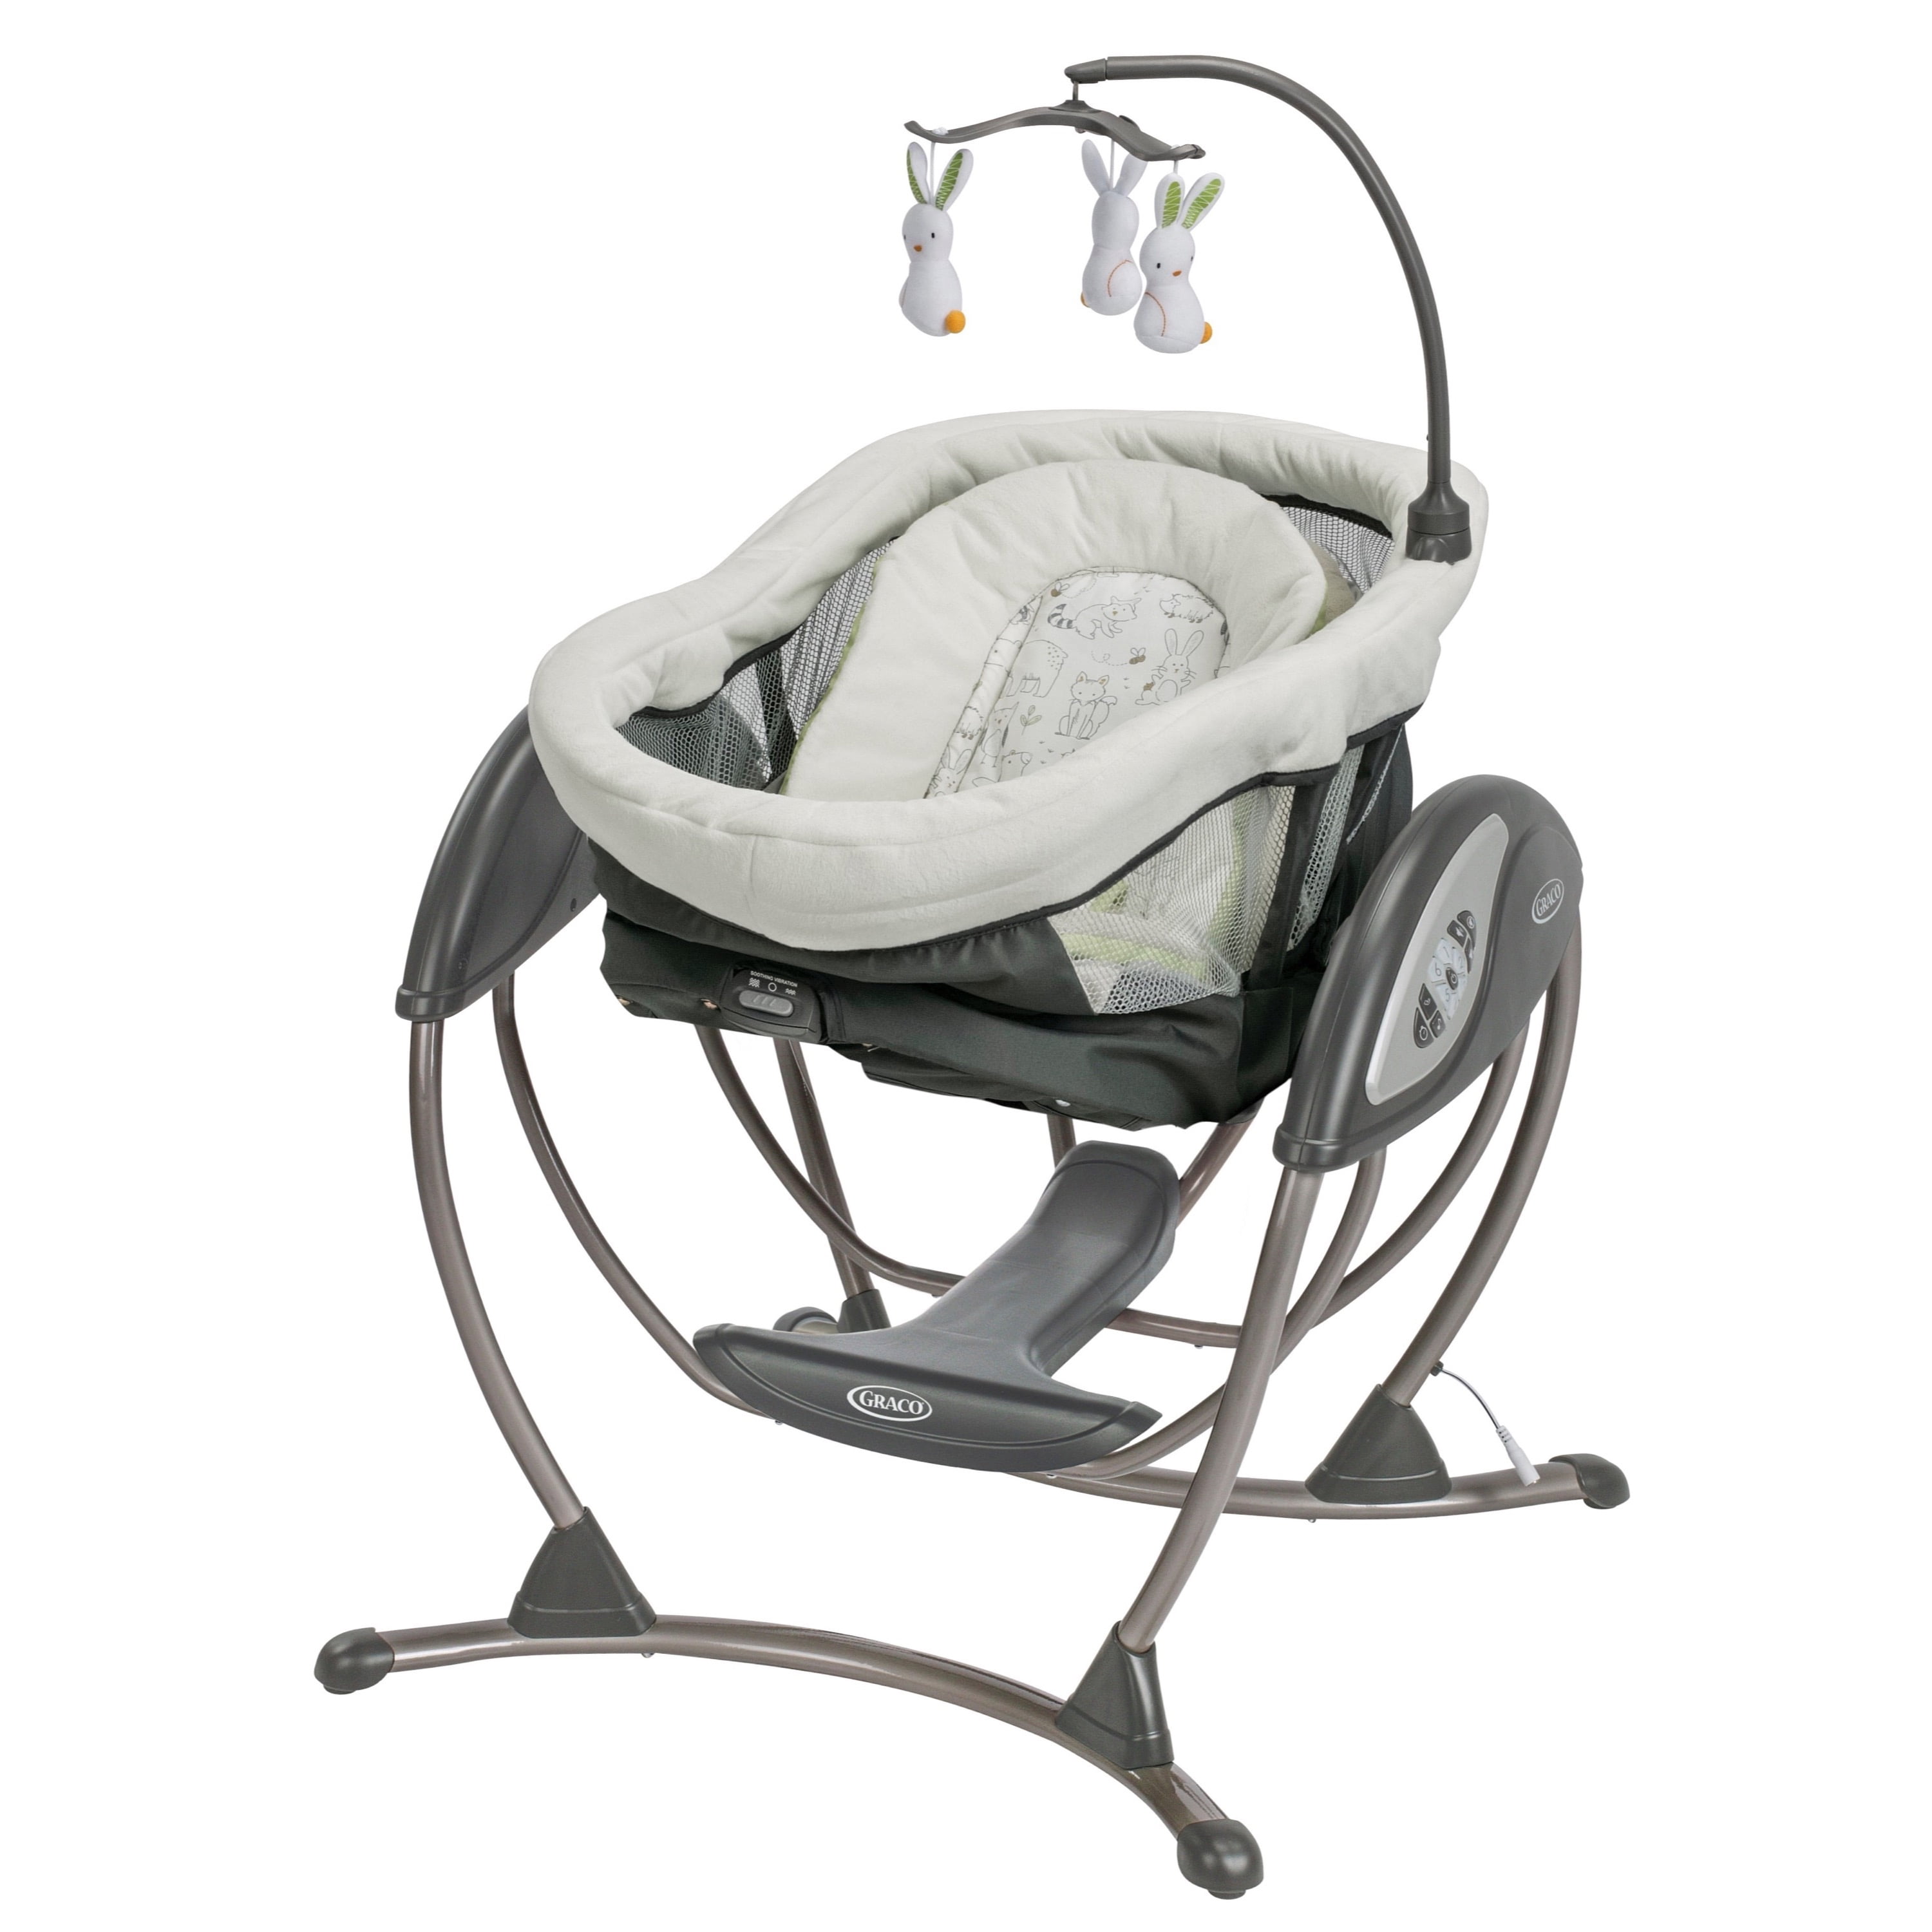 graco dreamglider troubleshooting